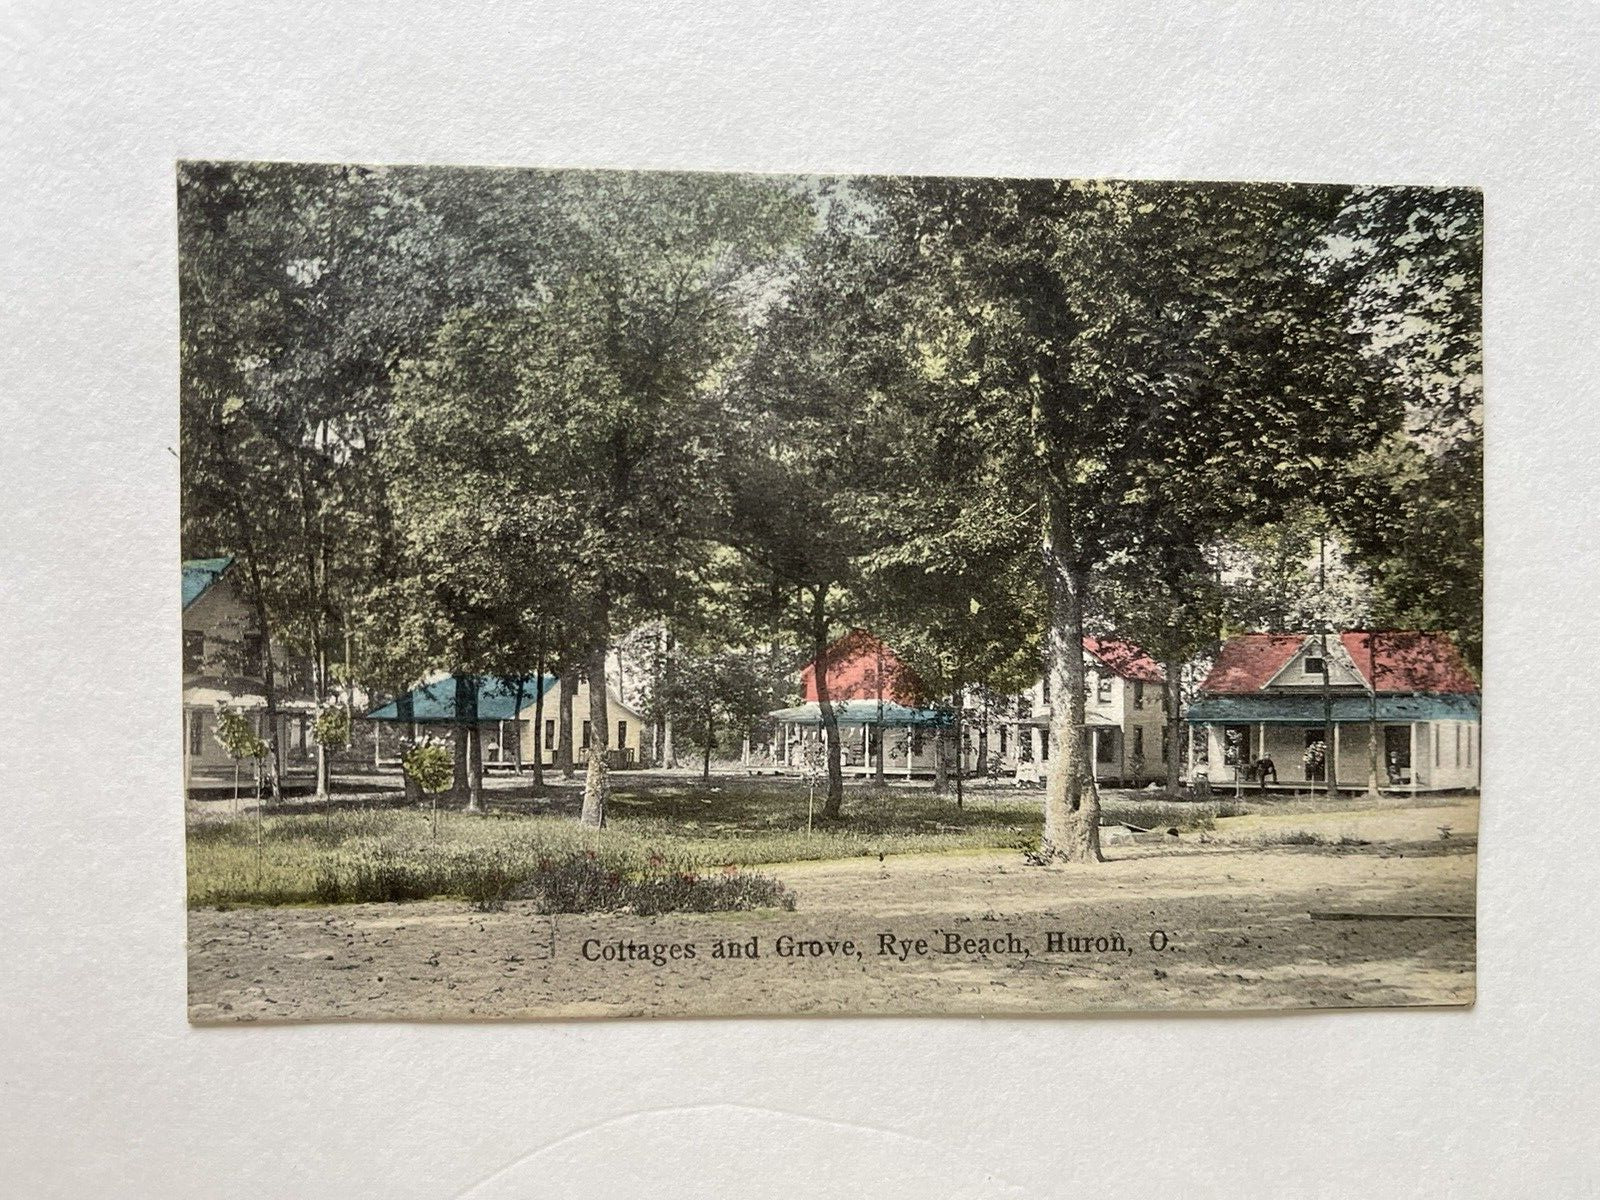 1907 Antique Vintage Postcard #11910 COTTAGES & GROVE Rye Beach Huron OH Germany